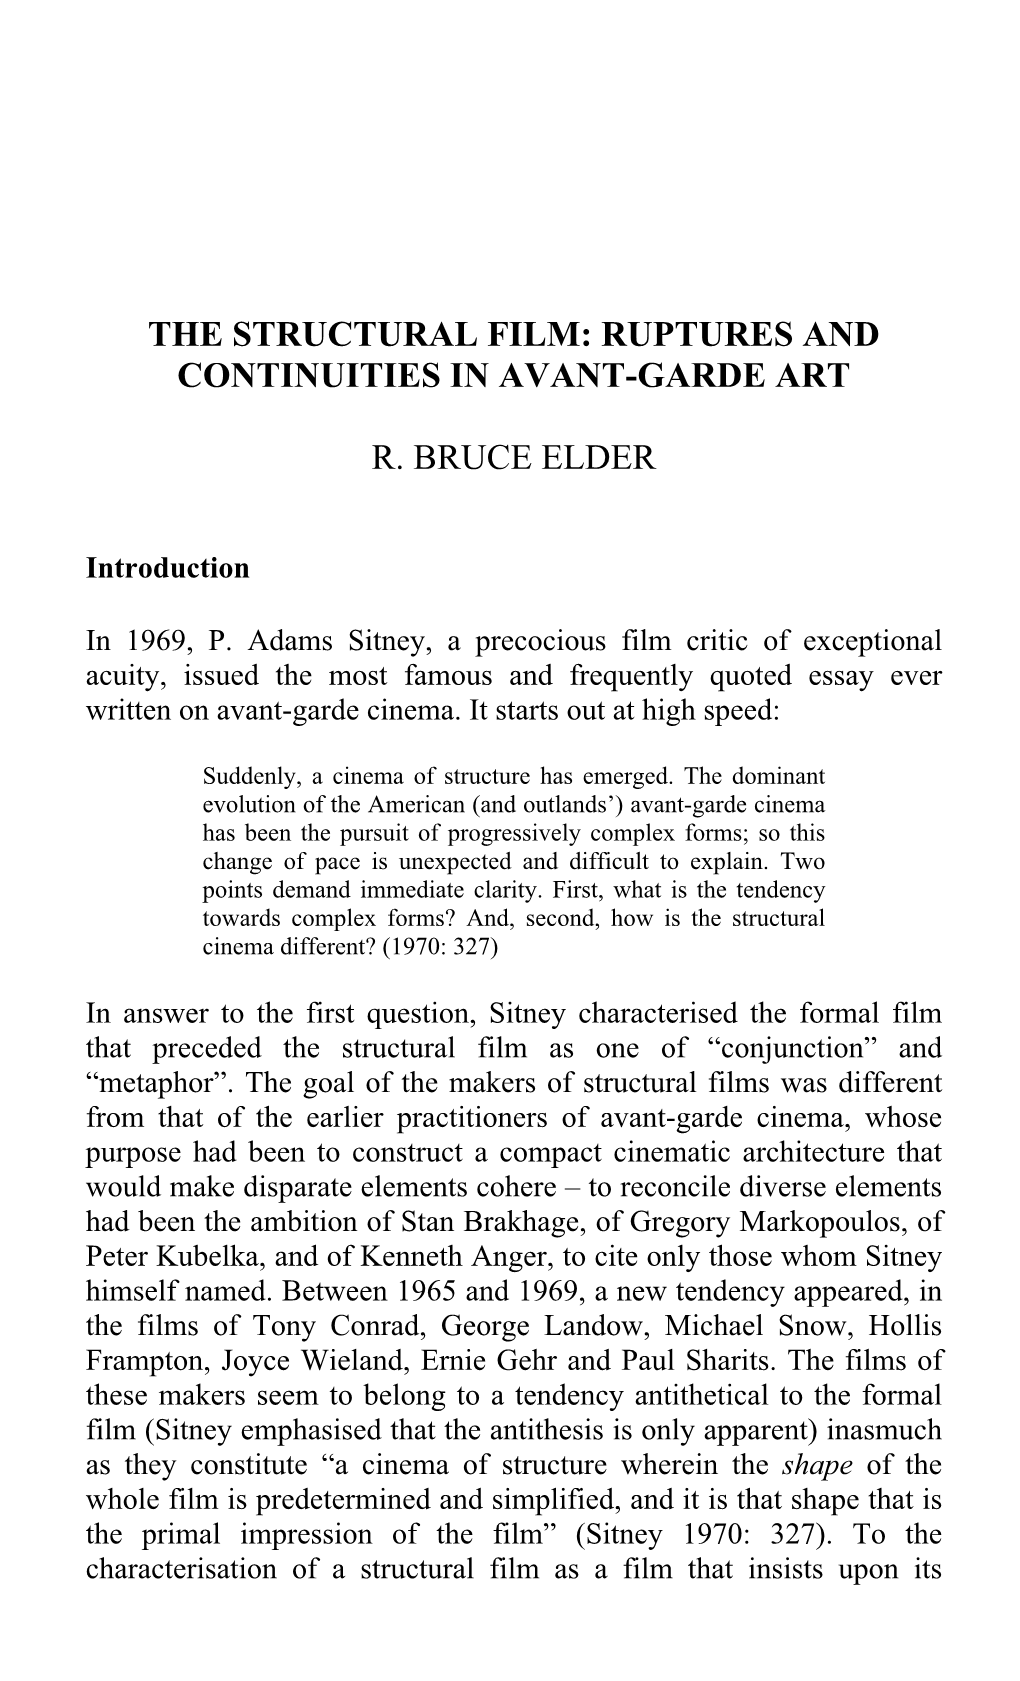 The Structural Film: Ruptures and Continuities in Avant-Garde Art